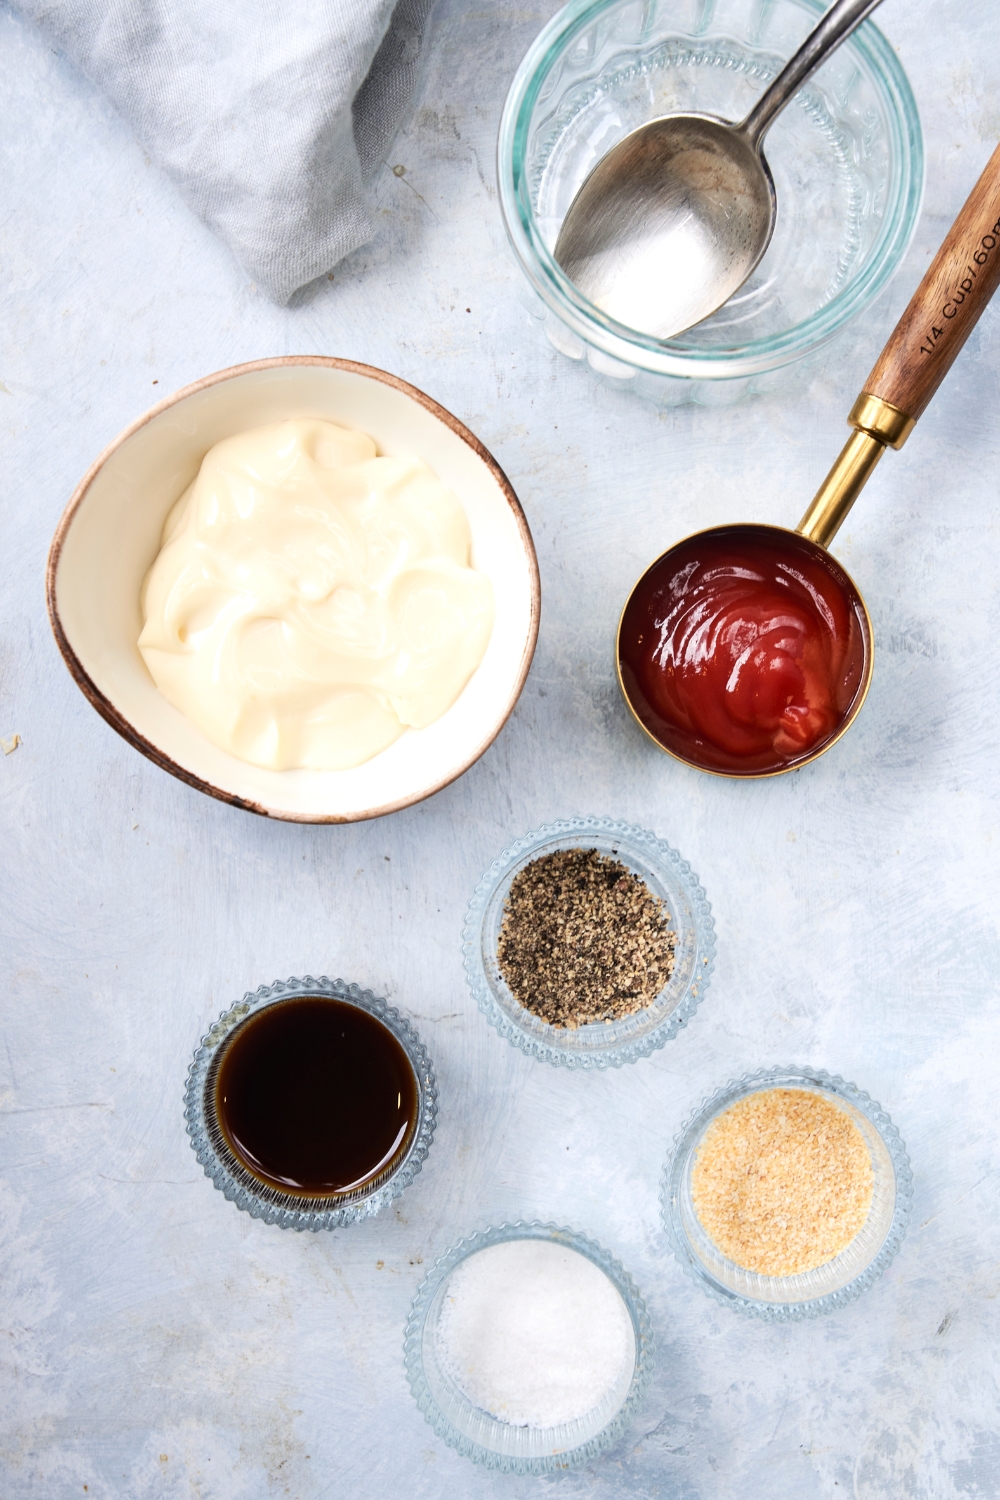 A countertop with various bowls with ingredients like mayo, ketchup, salt, pepper, Worcestershire sauce, and garlic powder.